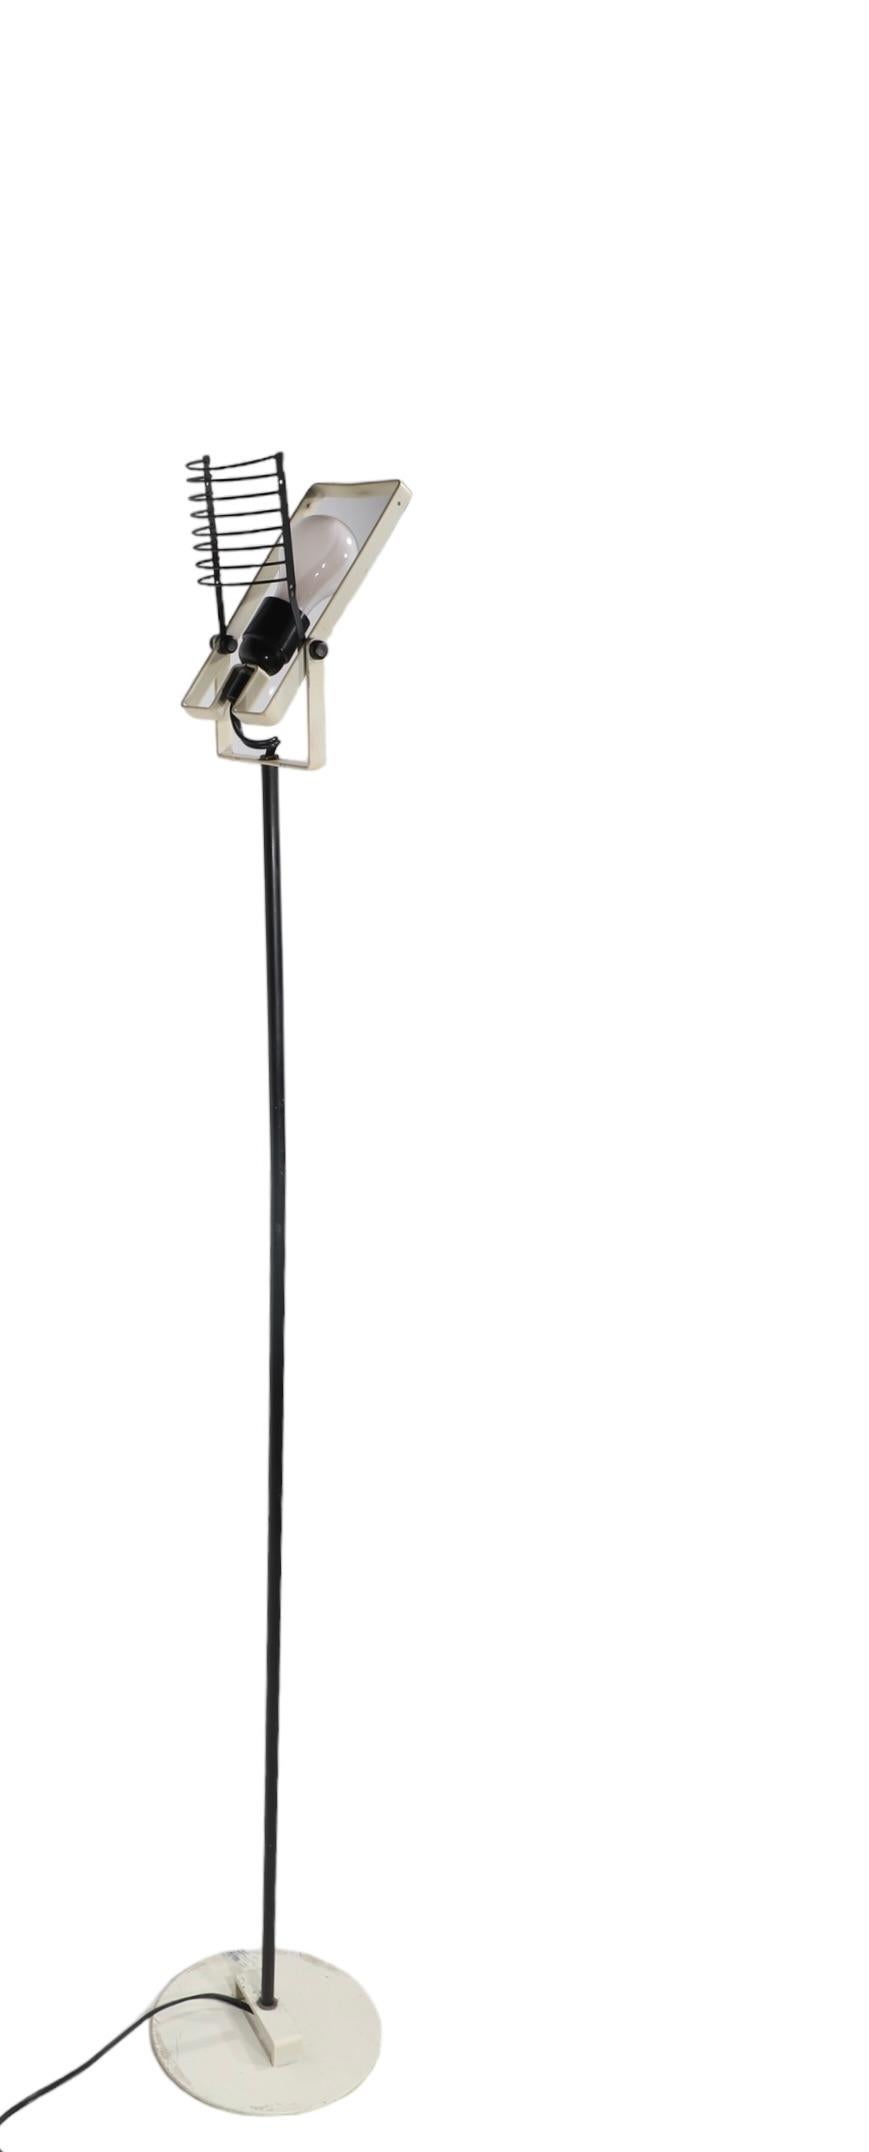 Post Modern  Italian made Sintesi floor lamp designed by Ernesto Gismondi for Artimidi circa 1970's.
 The lamp features an open cage shade, which tilts and a tilting structure which houses the bulb. This example is in good, original, working